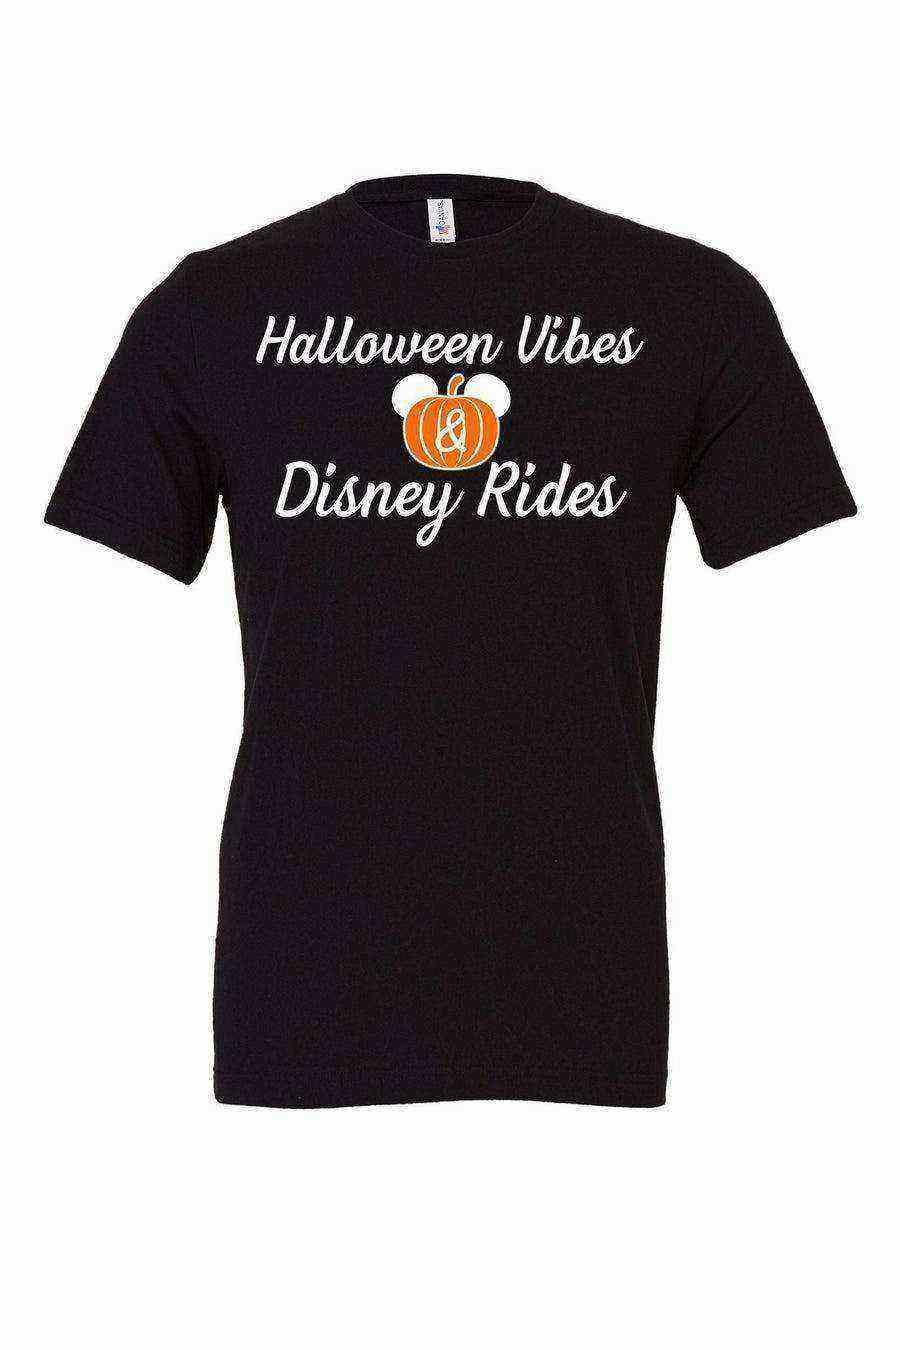 Womens | Halloween Vibes and Rides Shirt - Dylan's Tees